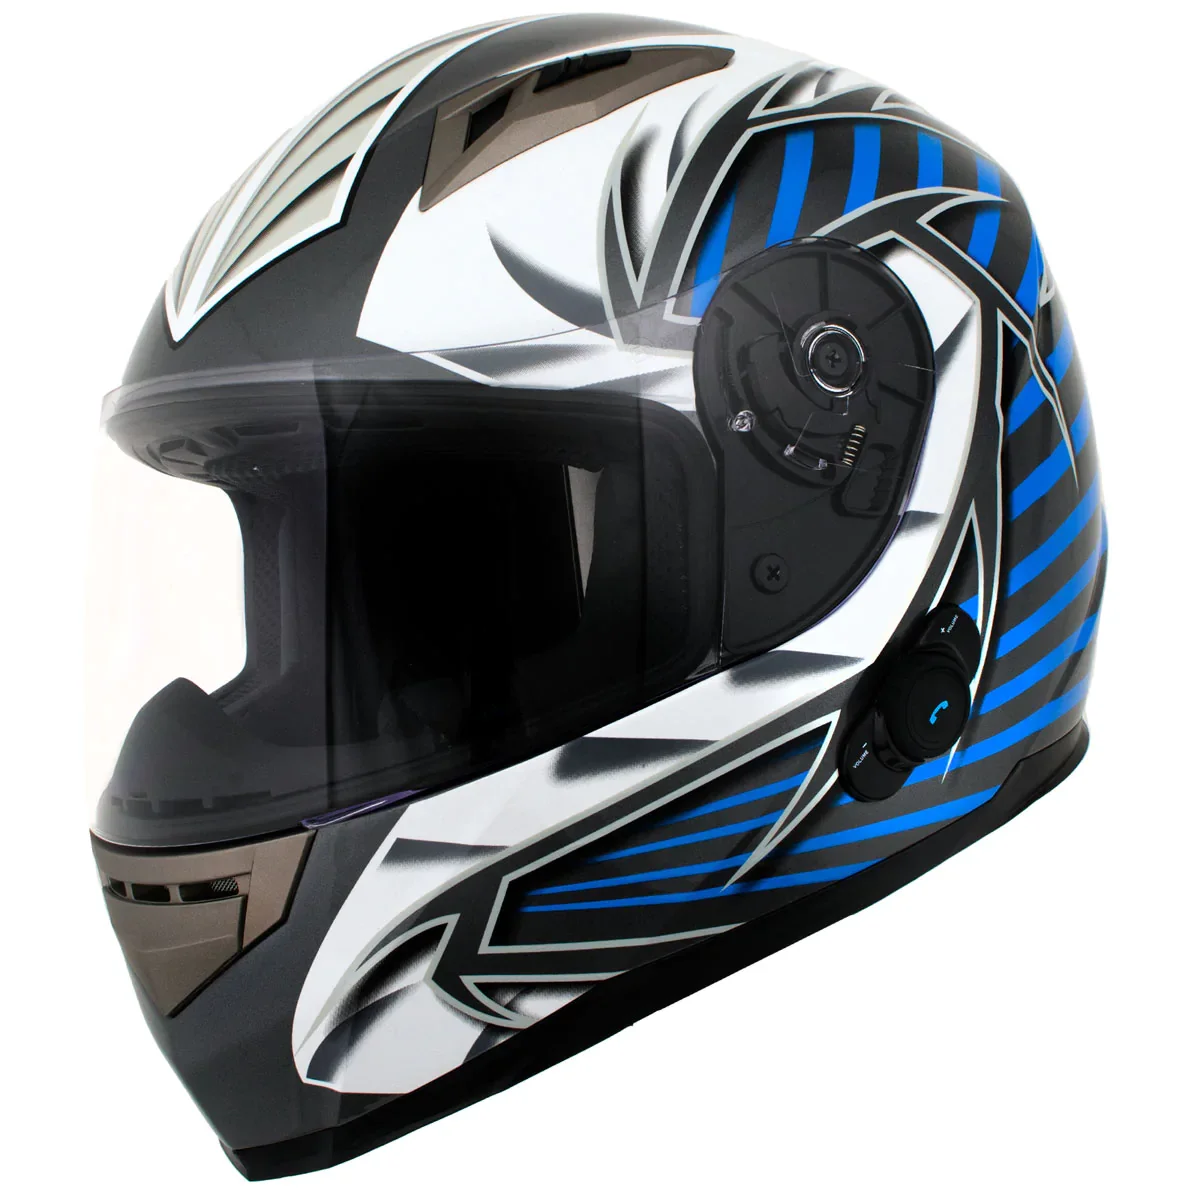 Image of Milwaukee Helmets H512 Titanium and Blue Vector 'Chit-Chat' Black Full Face Motorcycle Helmet with Wireless Communication